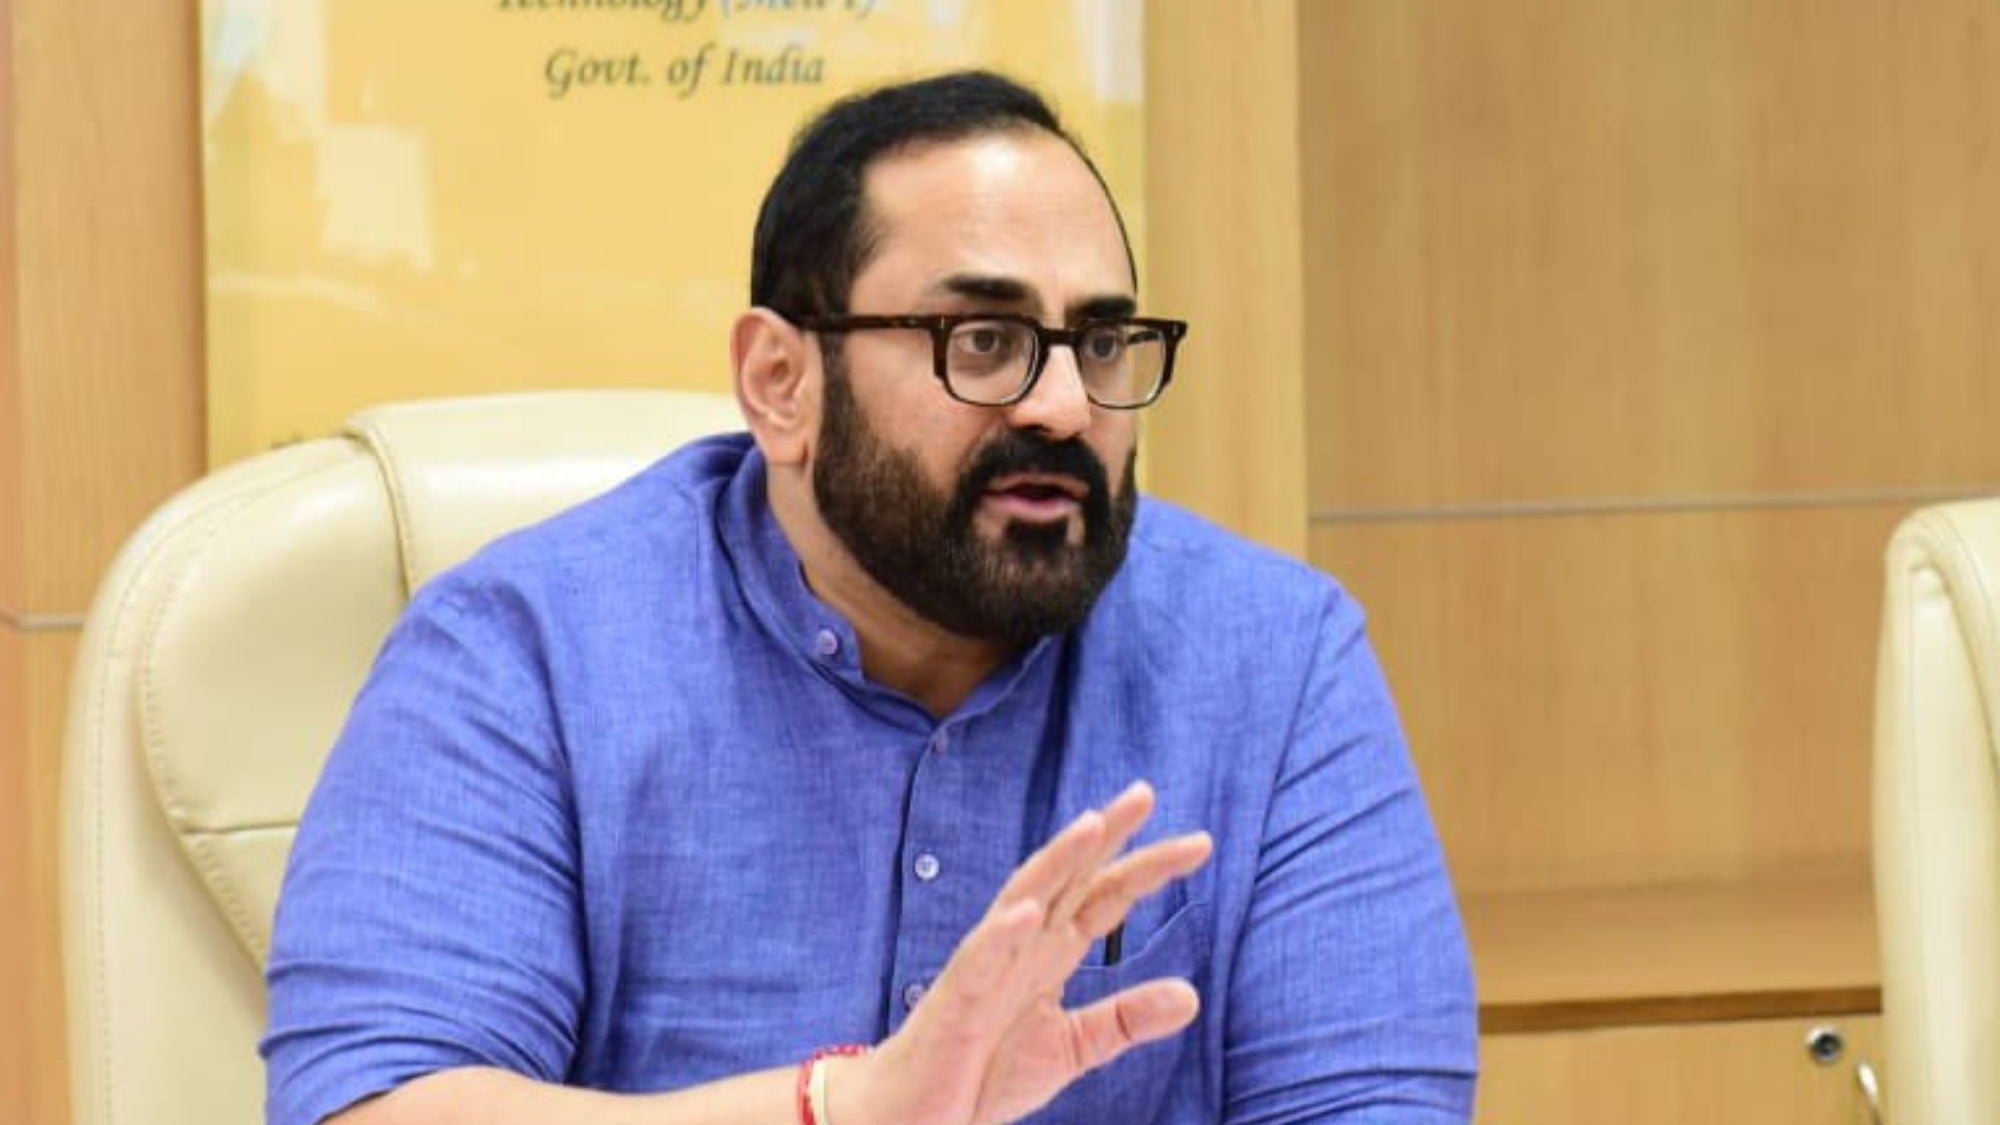 India Will Lead the World in Technology: Rajeev Chandrasekhar.